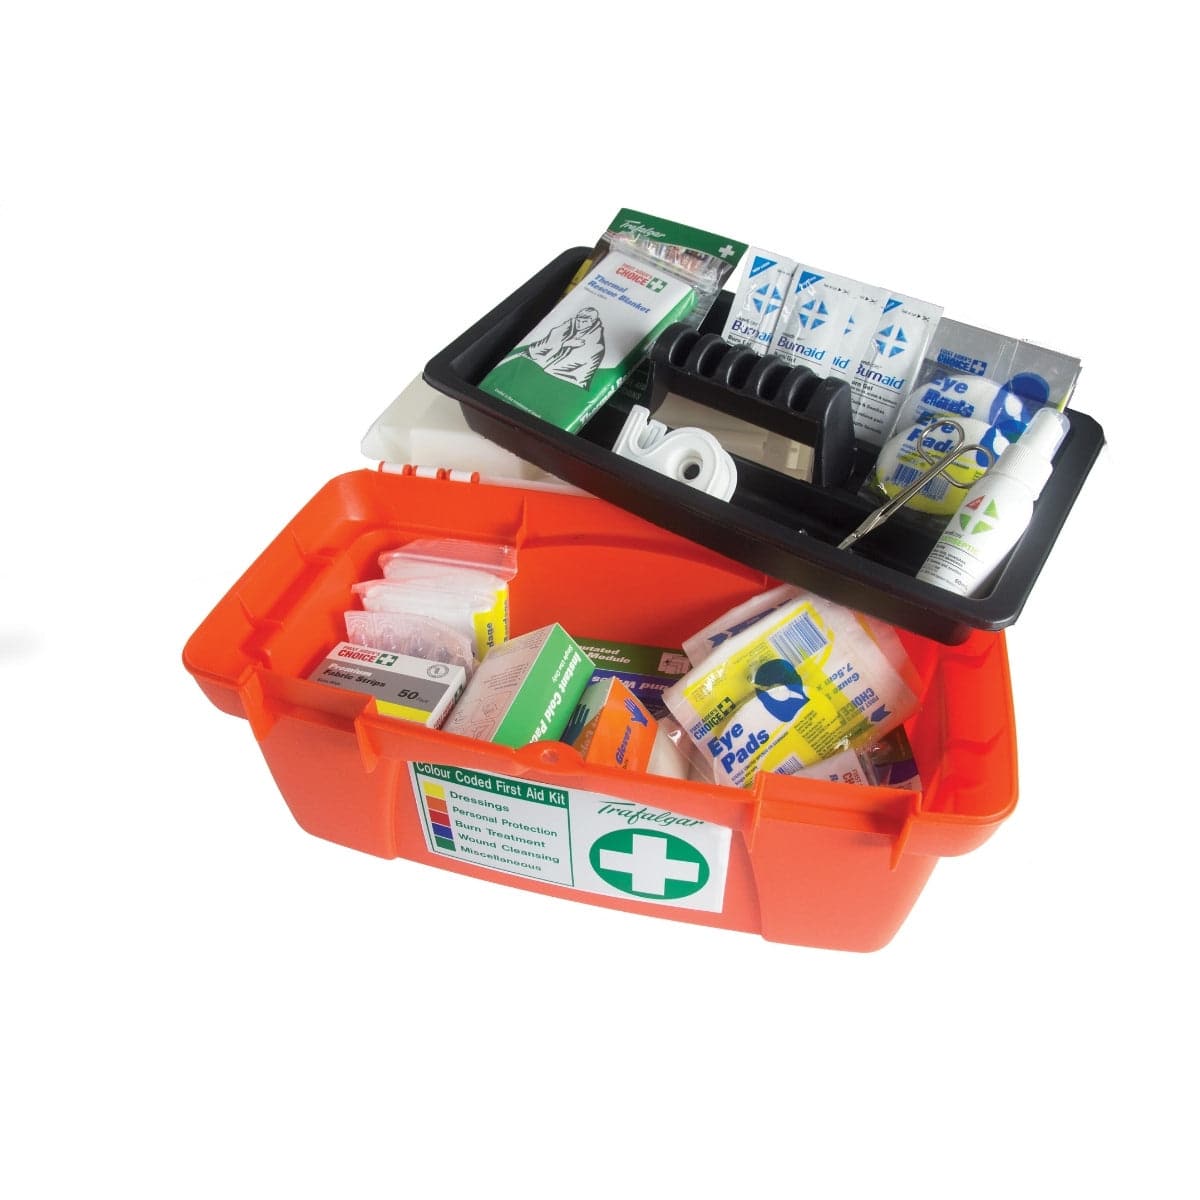 Workplace First Aid Kit - Portable WP1 (Hard Case)